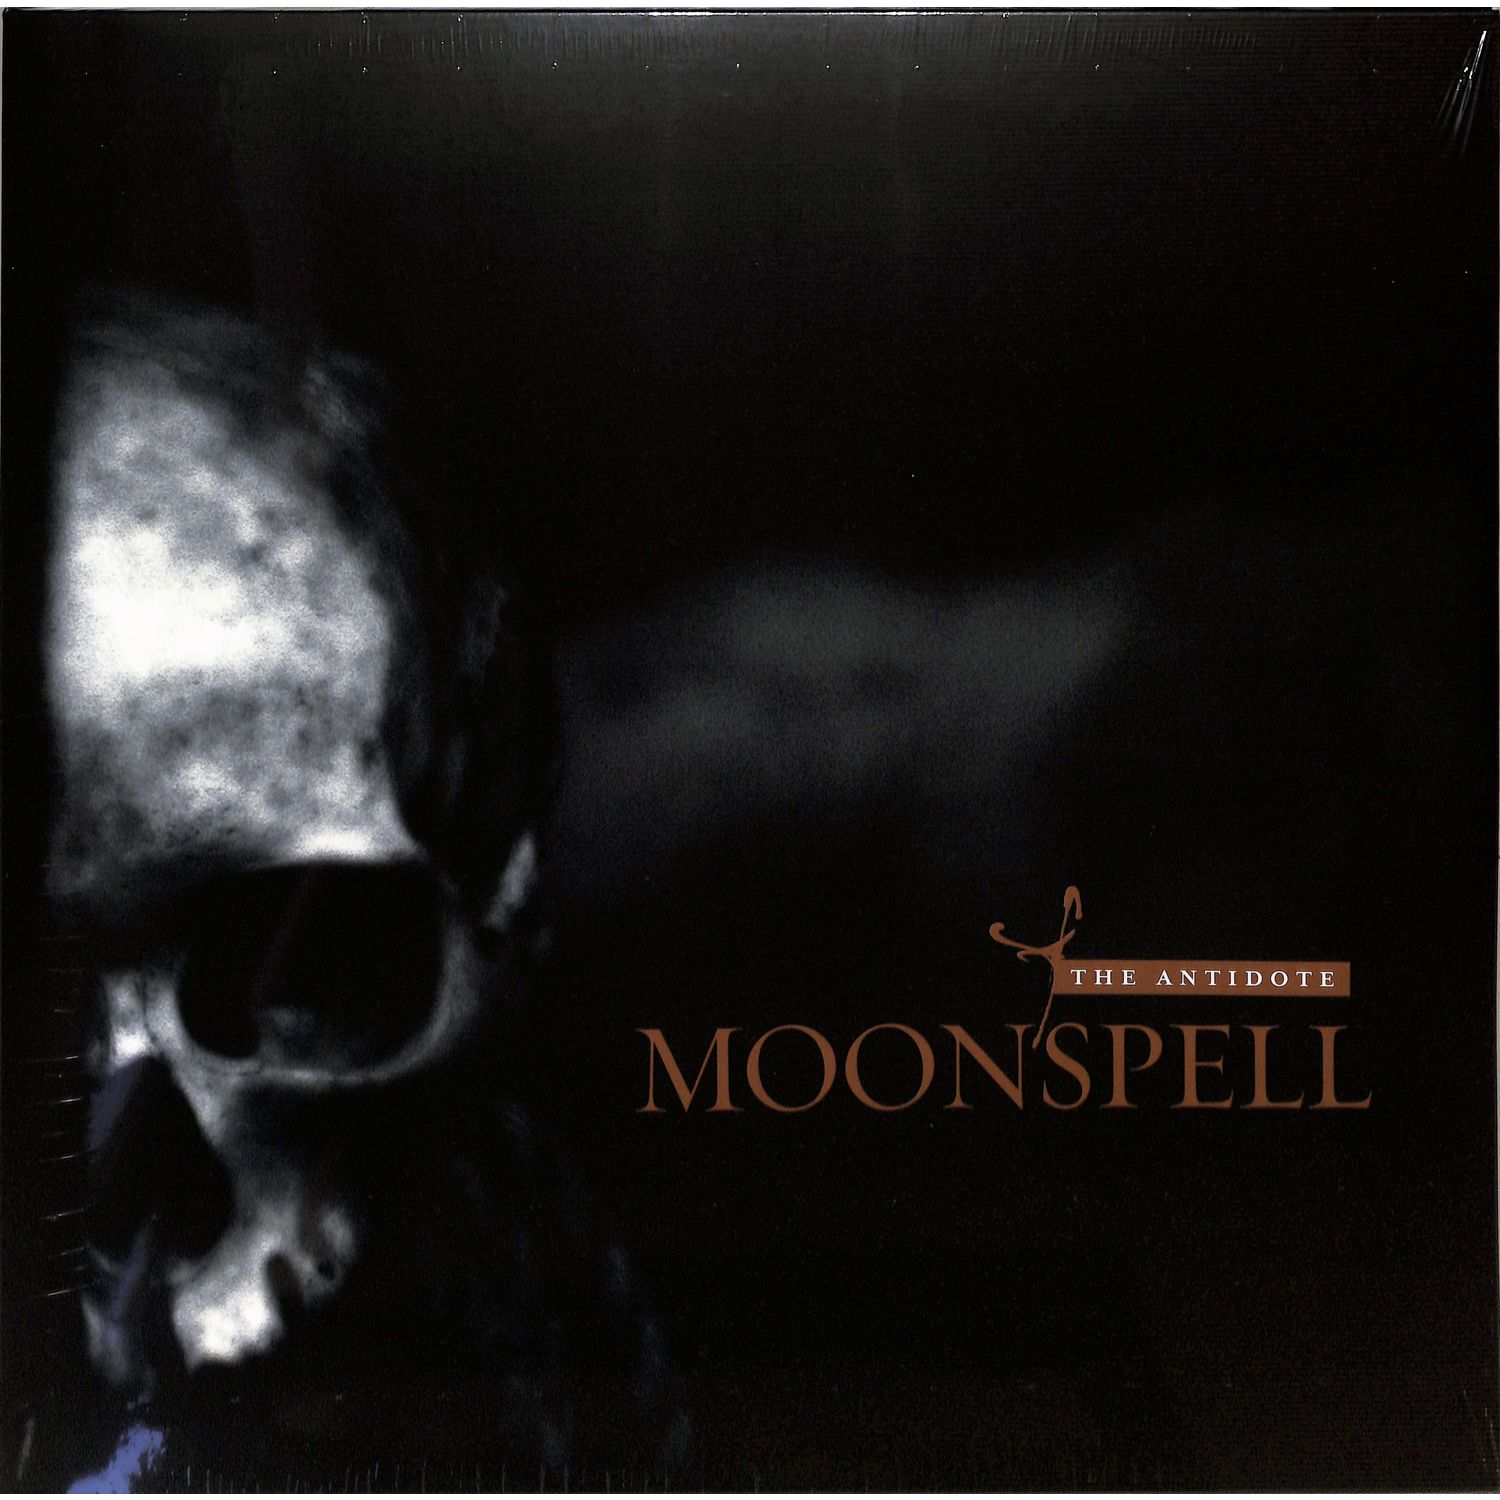 Moonspell - THE ANTIDOTE 